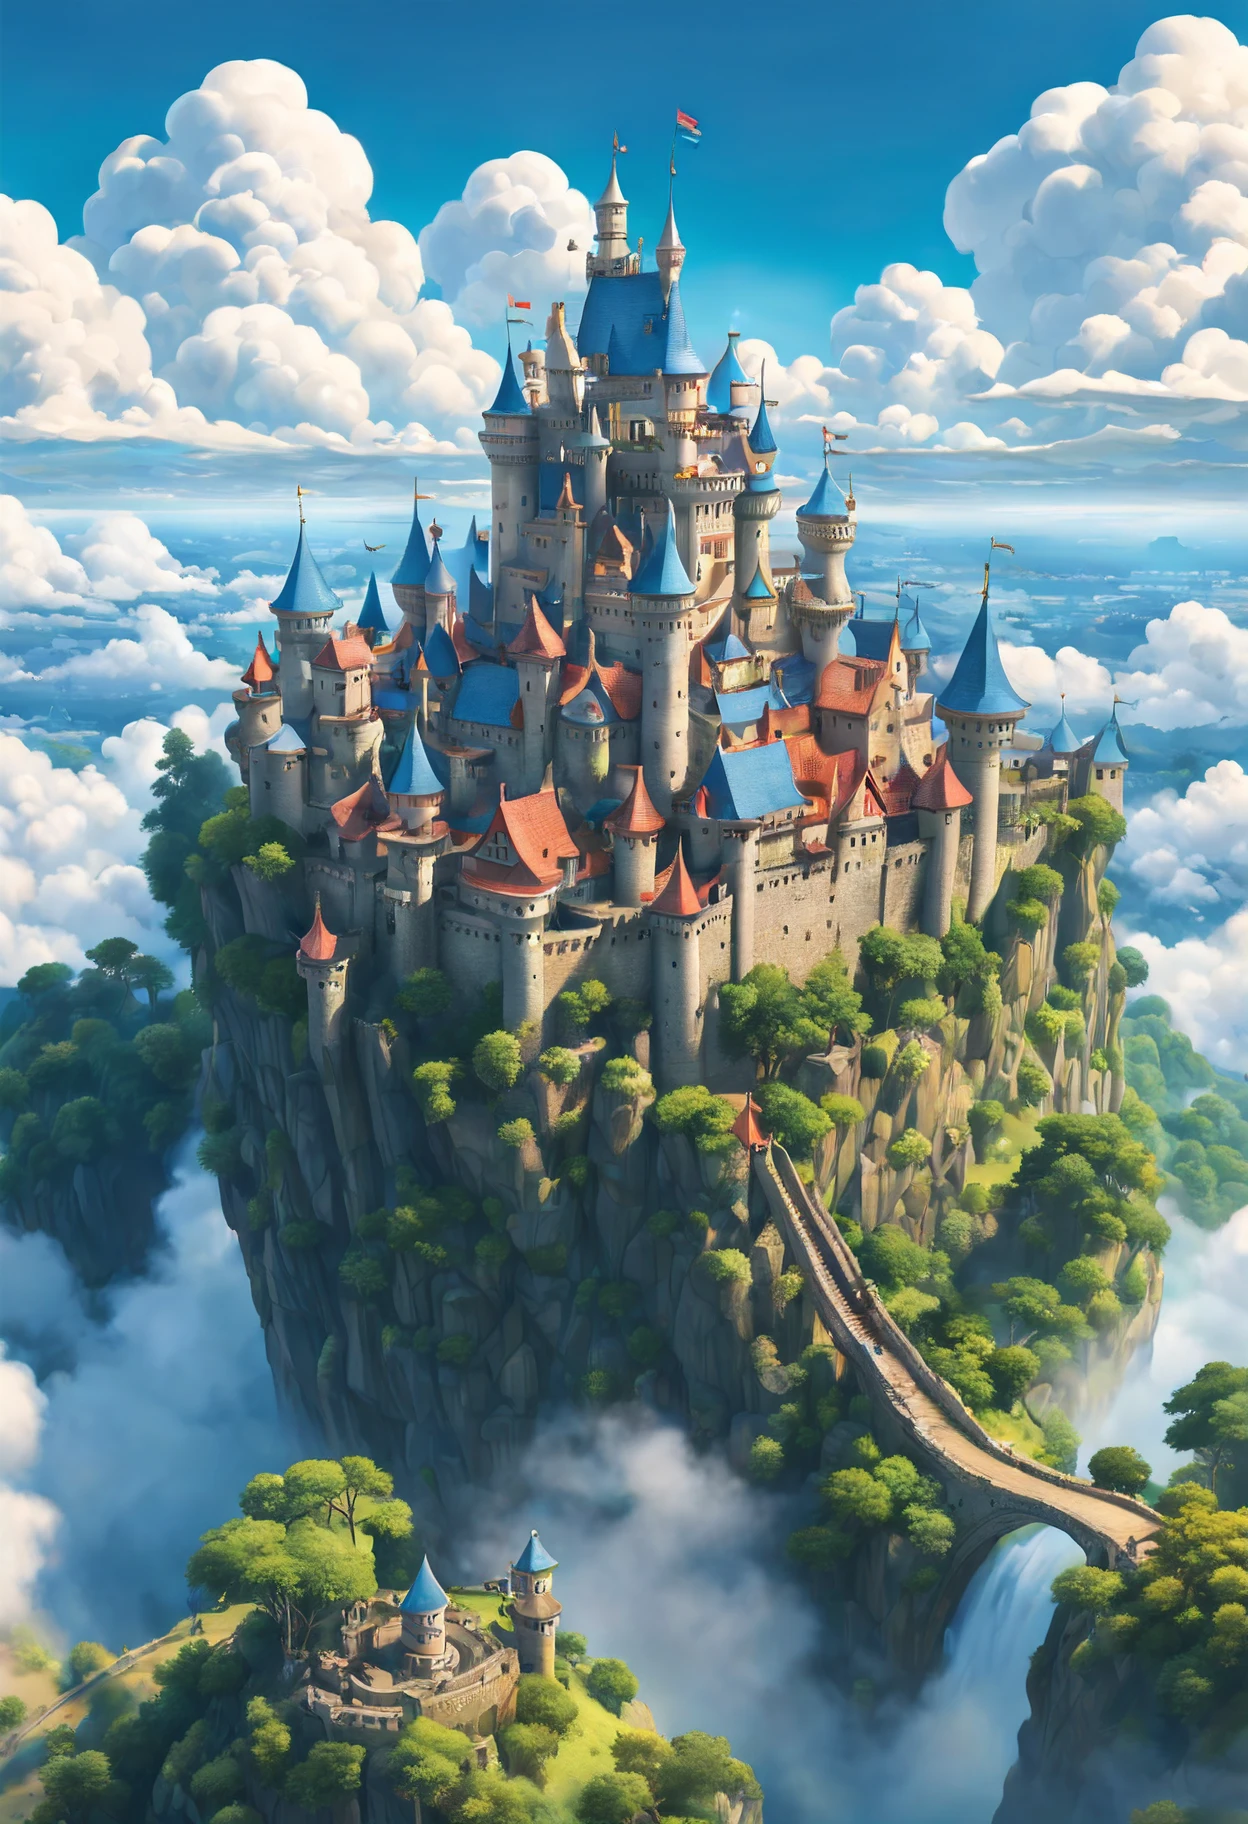 A fusion of Hayao Miyazaki and Studio Ghibli's art style, [castle|sky fortress], soaring amidst the clouds, splendid view of an (animated kingdom in the sky:1.5), as seen through the lens of a (drone:1.2), captured in vivid, panoramic 8K, painted with whimsical colors, set in a (sunlit afternoon), featuring meticulous details of the castle architecture, capturing the essence of a dreamlikeart and mdjrny-v4 style, nostalgic lighting setting a vintage charm, highlighted by a [(Steven Spielberg:1.2) inspired cinematic magic], intricate detailing reminiscent of Claude Monet and Vincent van Gogh's style, a fairytale come alive in a (telephoto lens) shot